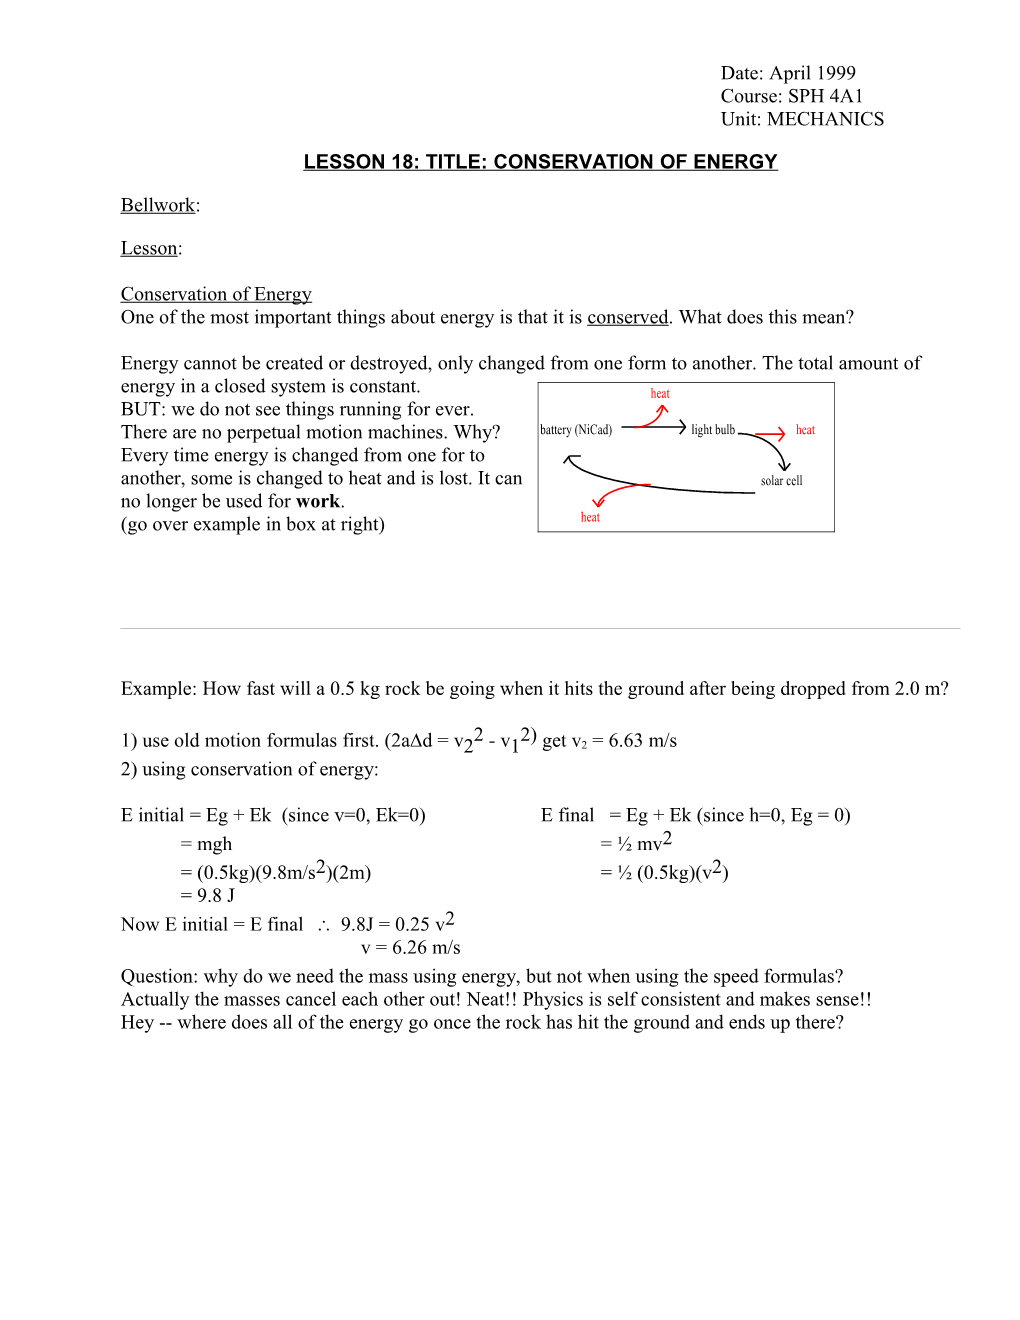 Lesson 18: Title: Conservation of Energy